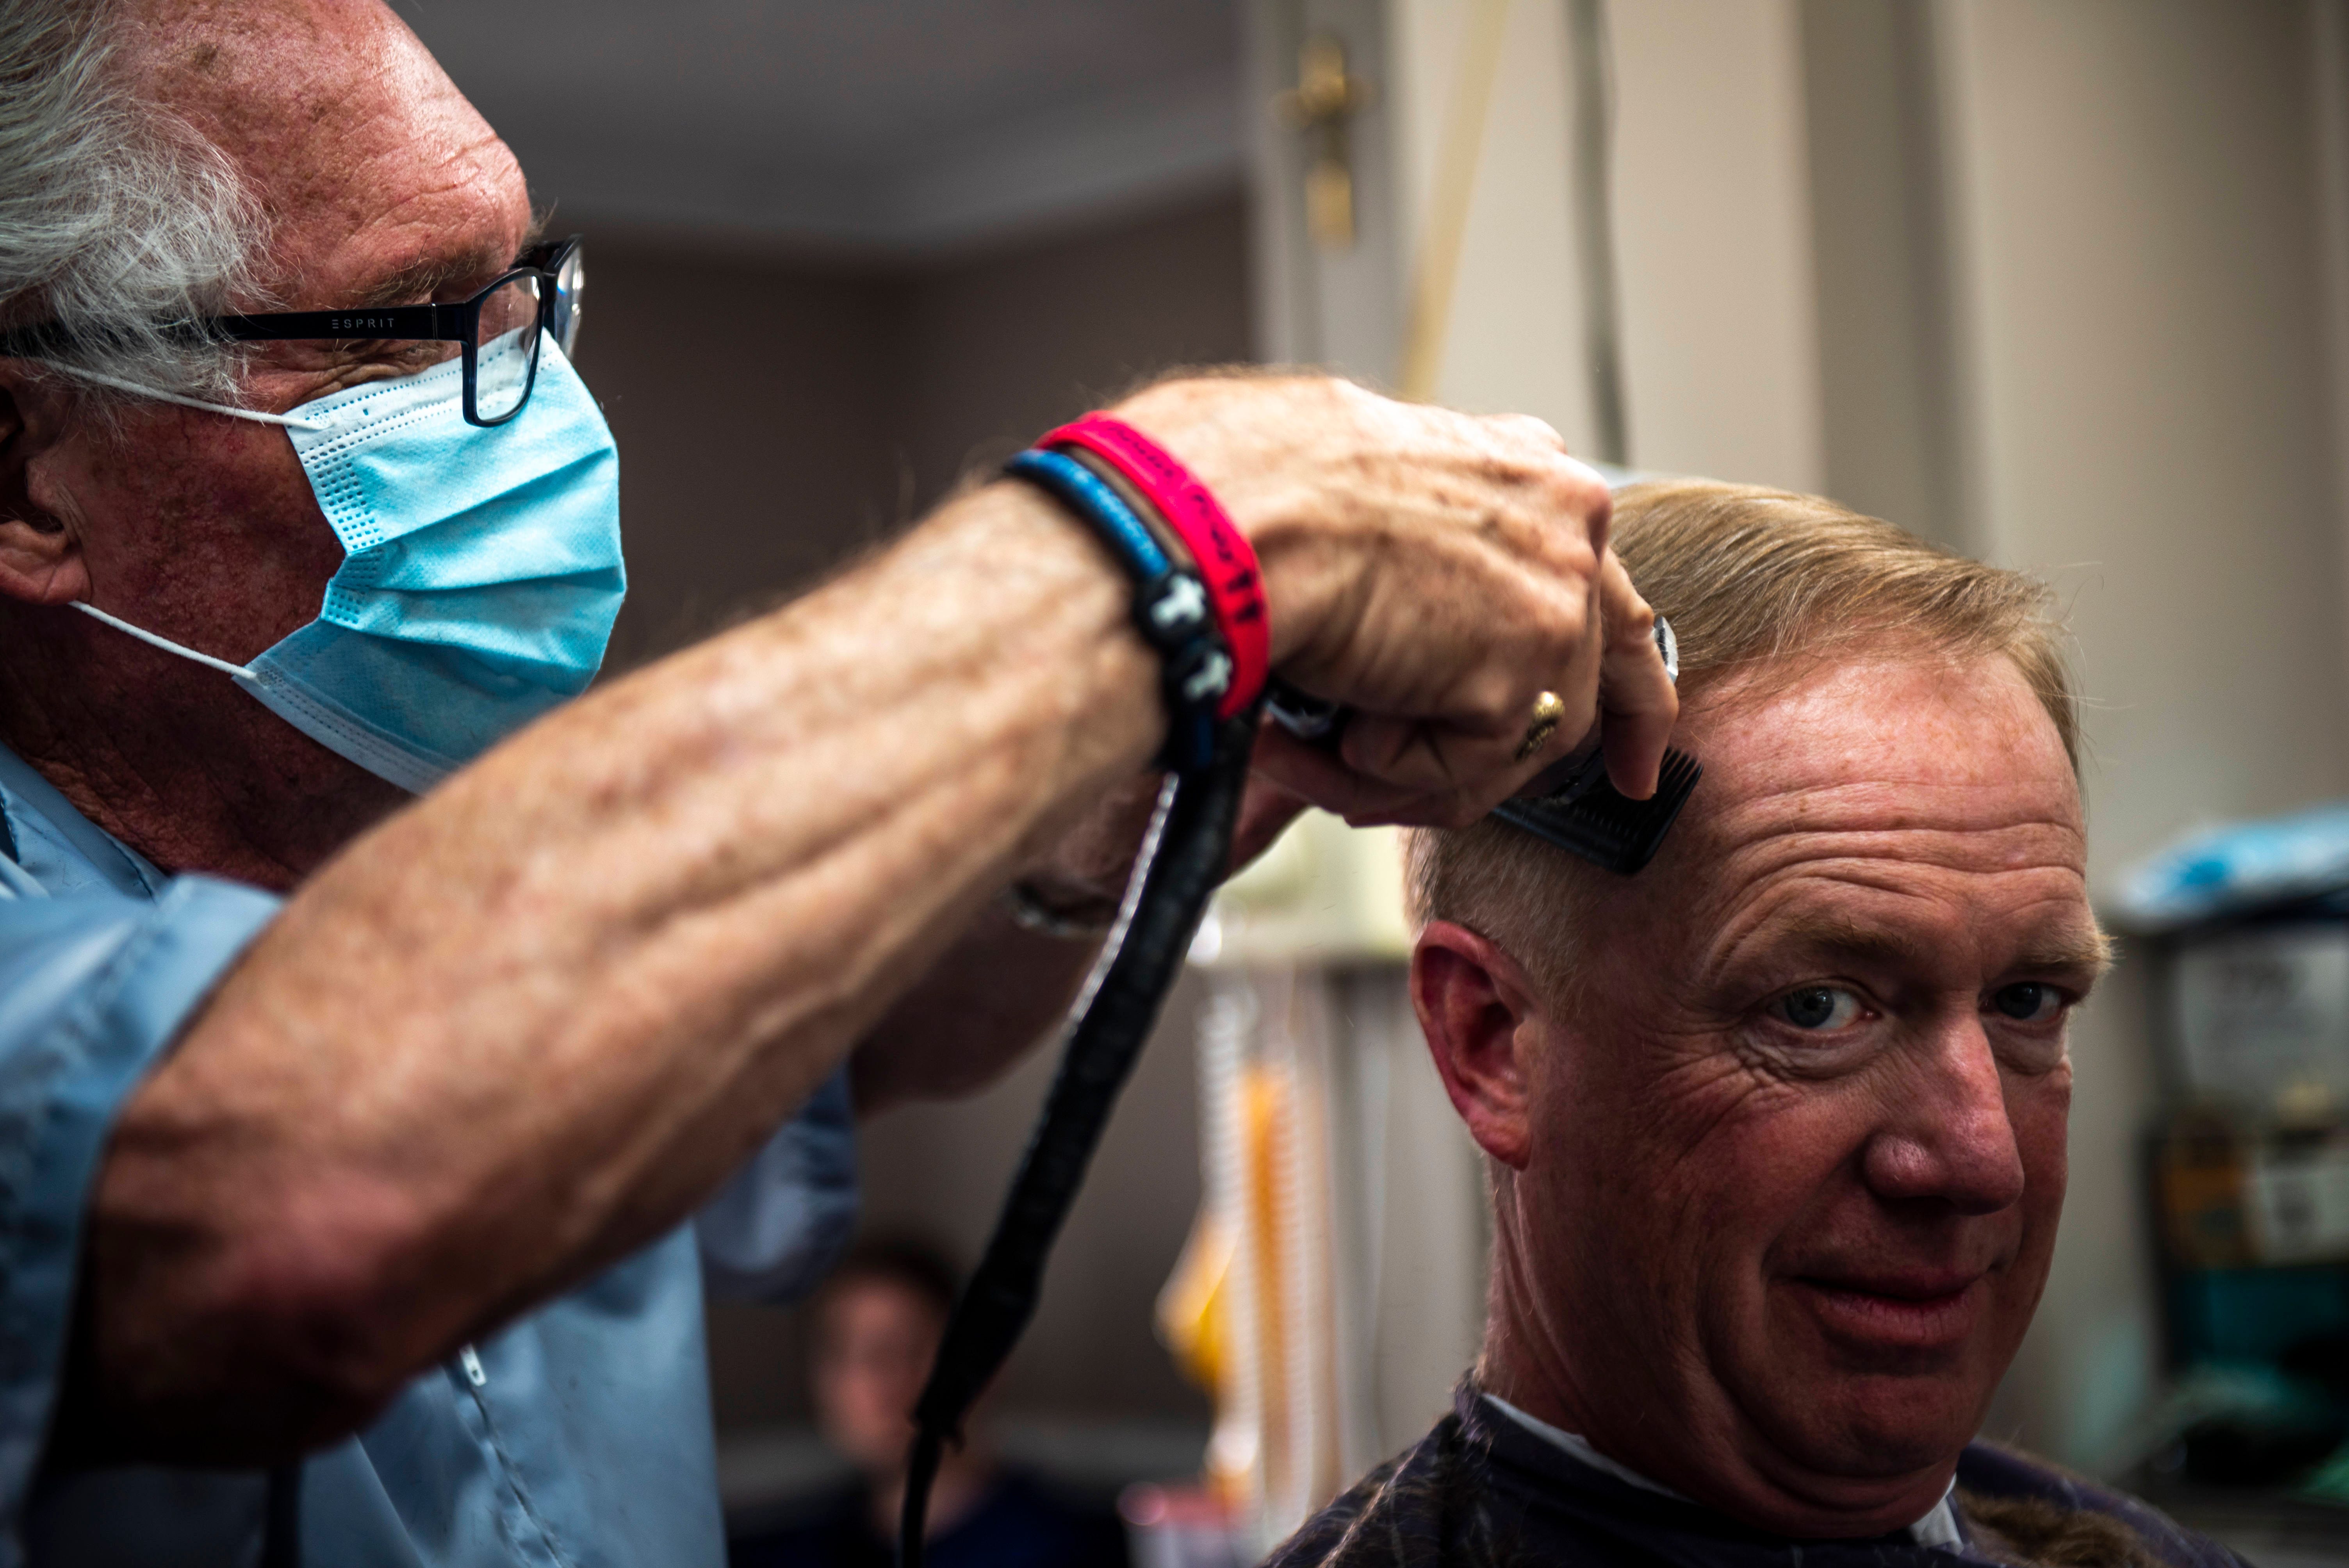 Karl Manke, 77, cuts the hair of Craig Wiker of Dowagiac at his barbershop in Owosso, on May 11, 2020.